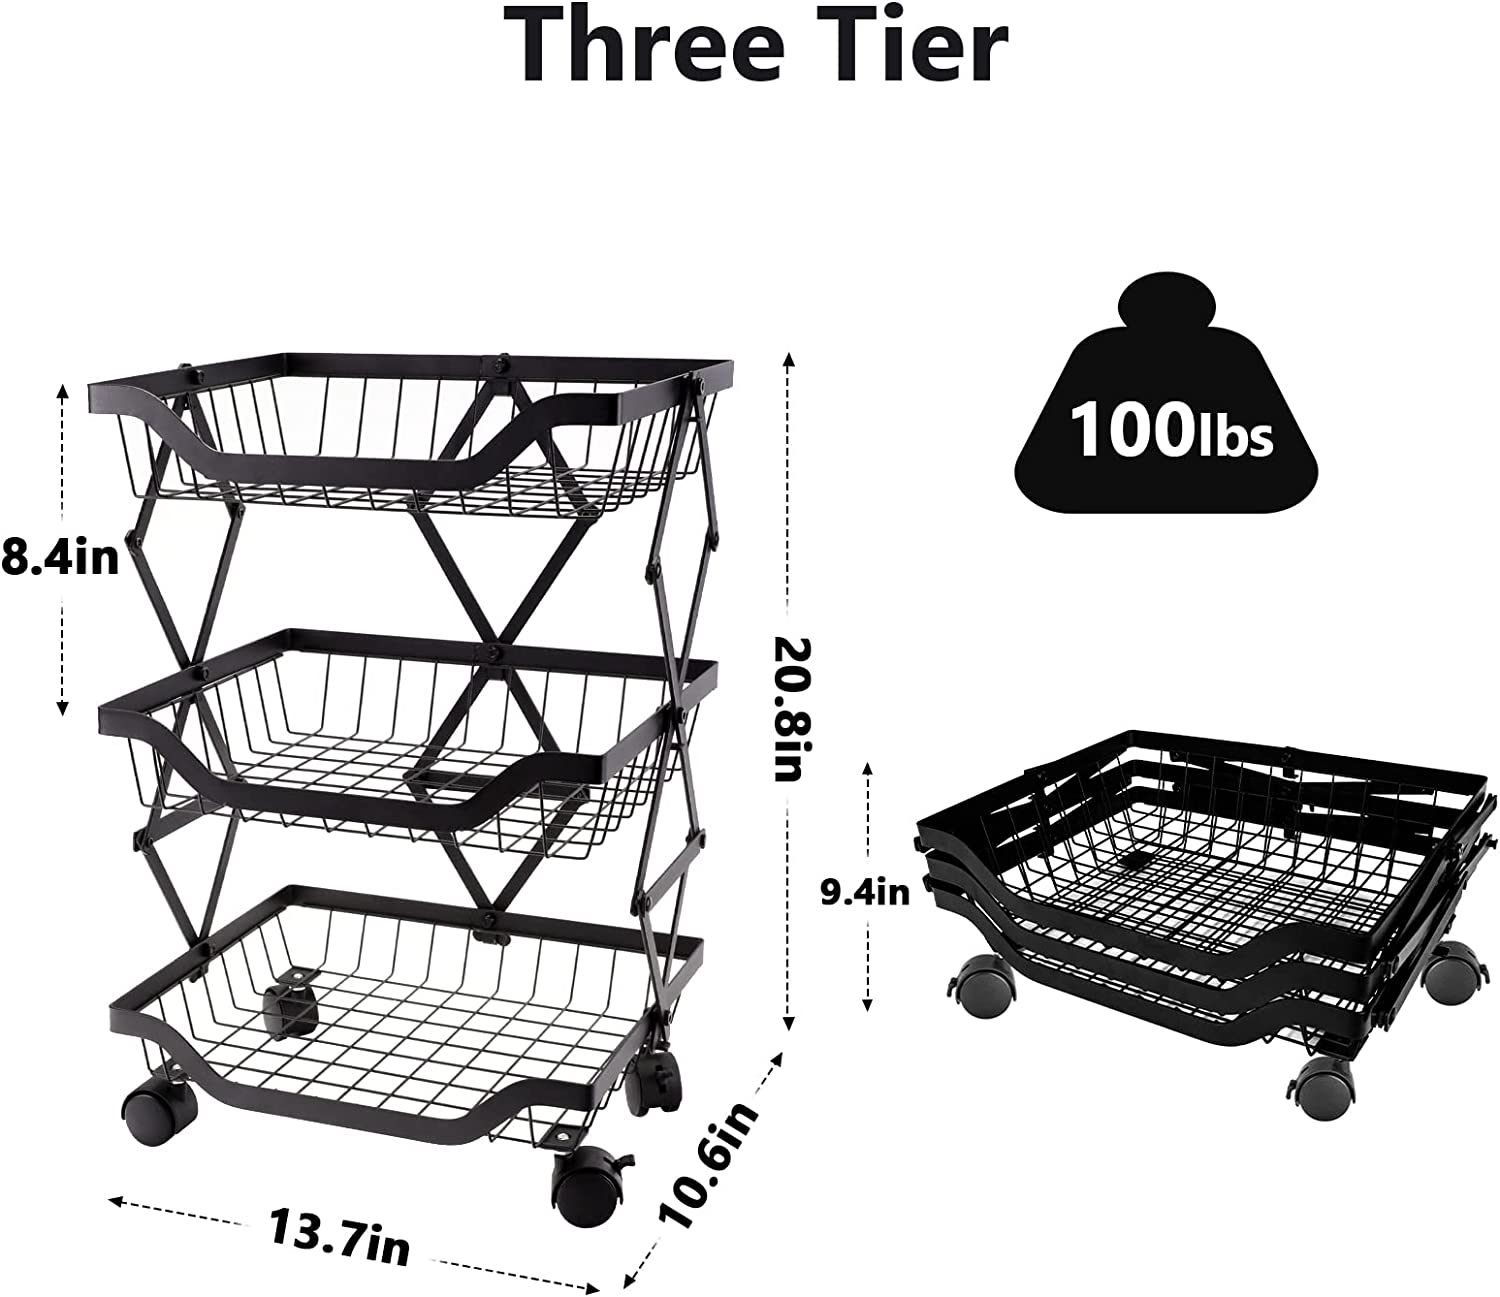 Fruit Basket for Kitchen - 3 Tier Basket Stand - Foldable Fruit and Vegetable Storage Cart with Detachable Wheels - Potato and Onion Storage - Basket Storage Tower for Kitchen， Pantry， Bathroom